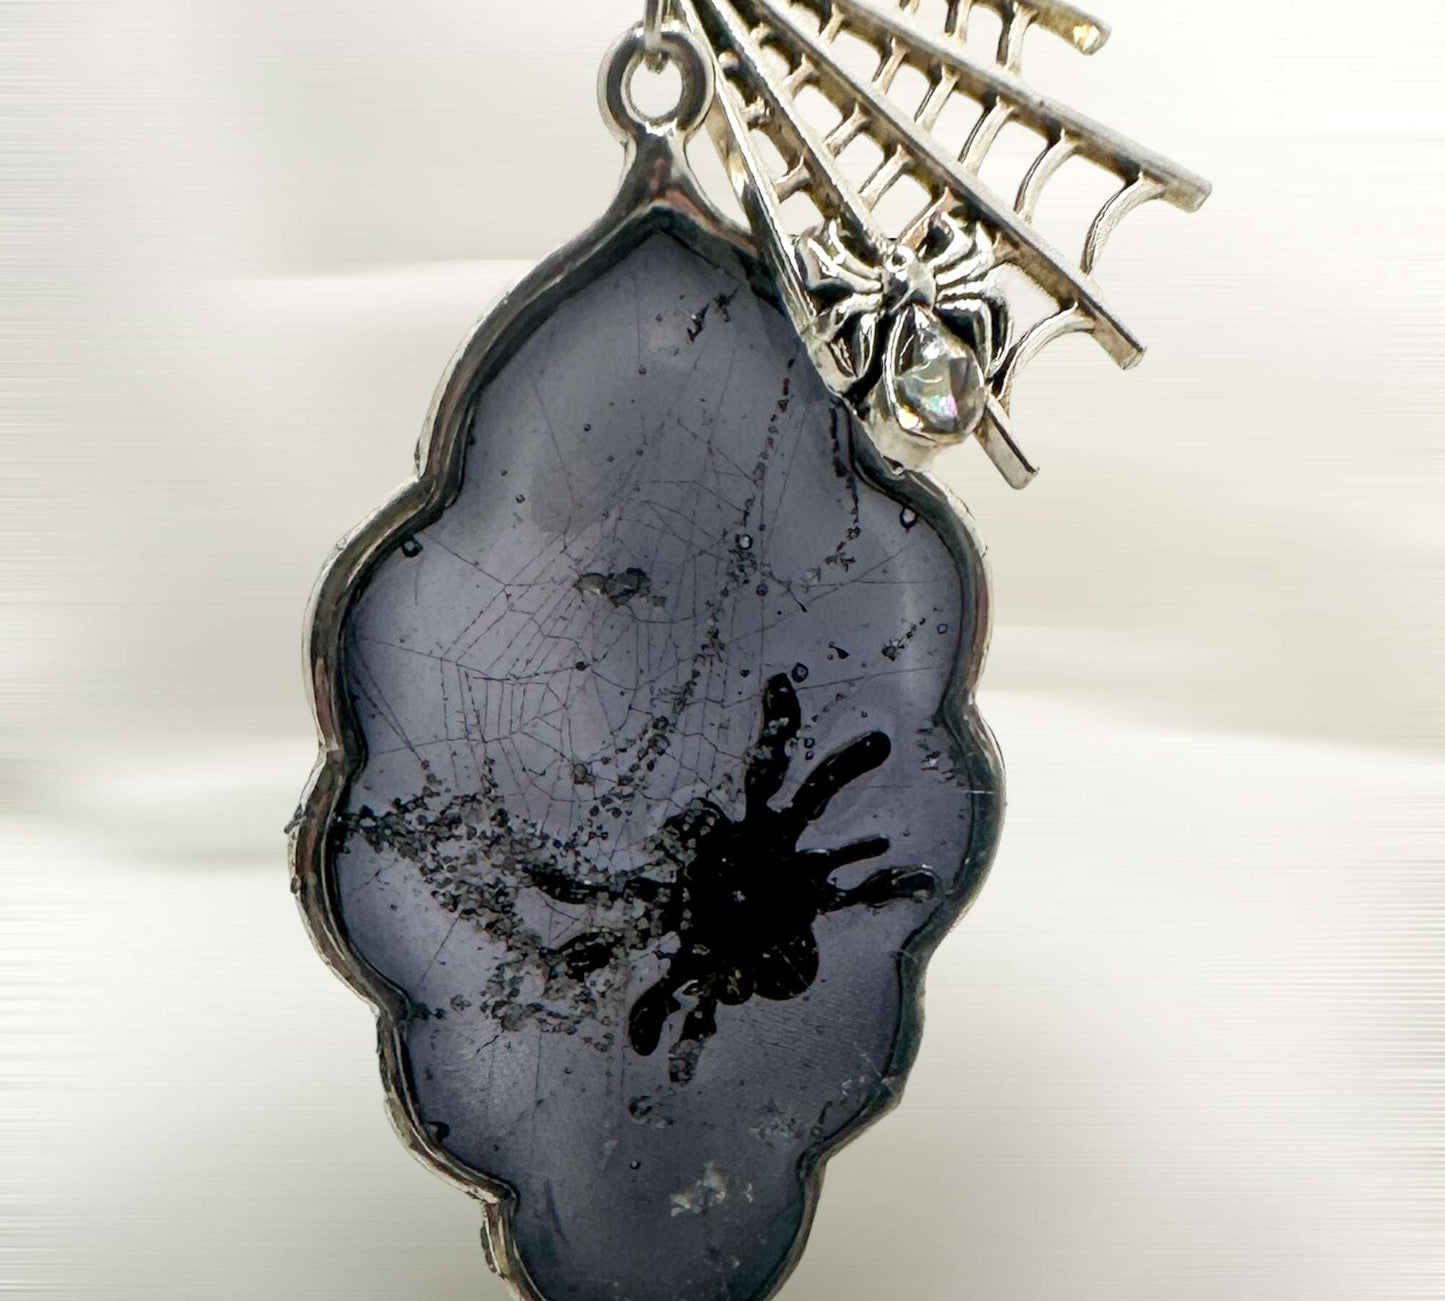 Spiderweb Nature-inspired Necklace- Nature's Beauty on Display